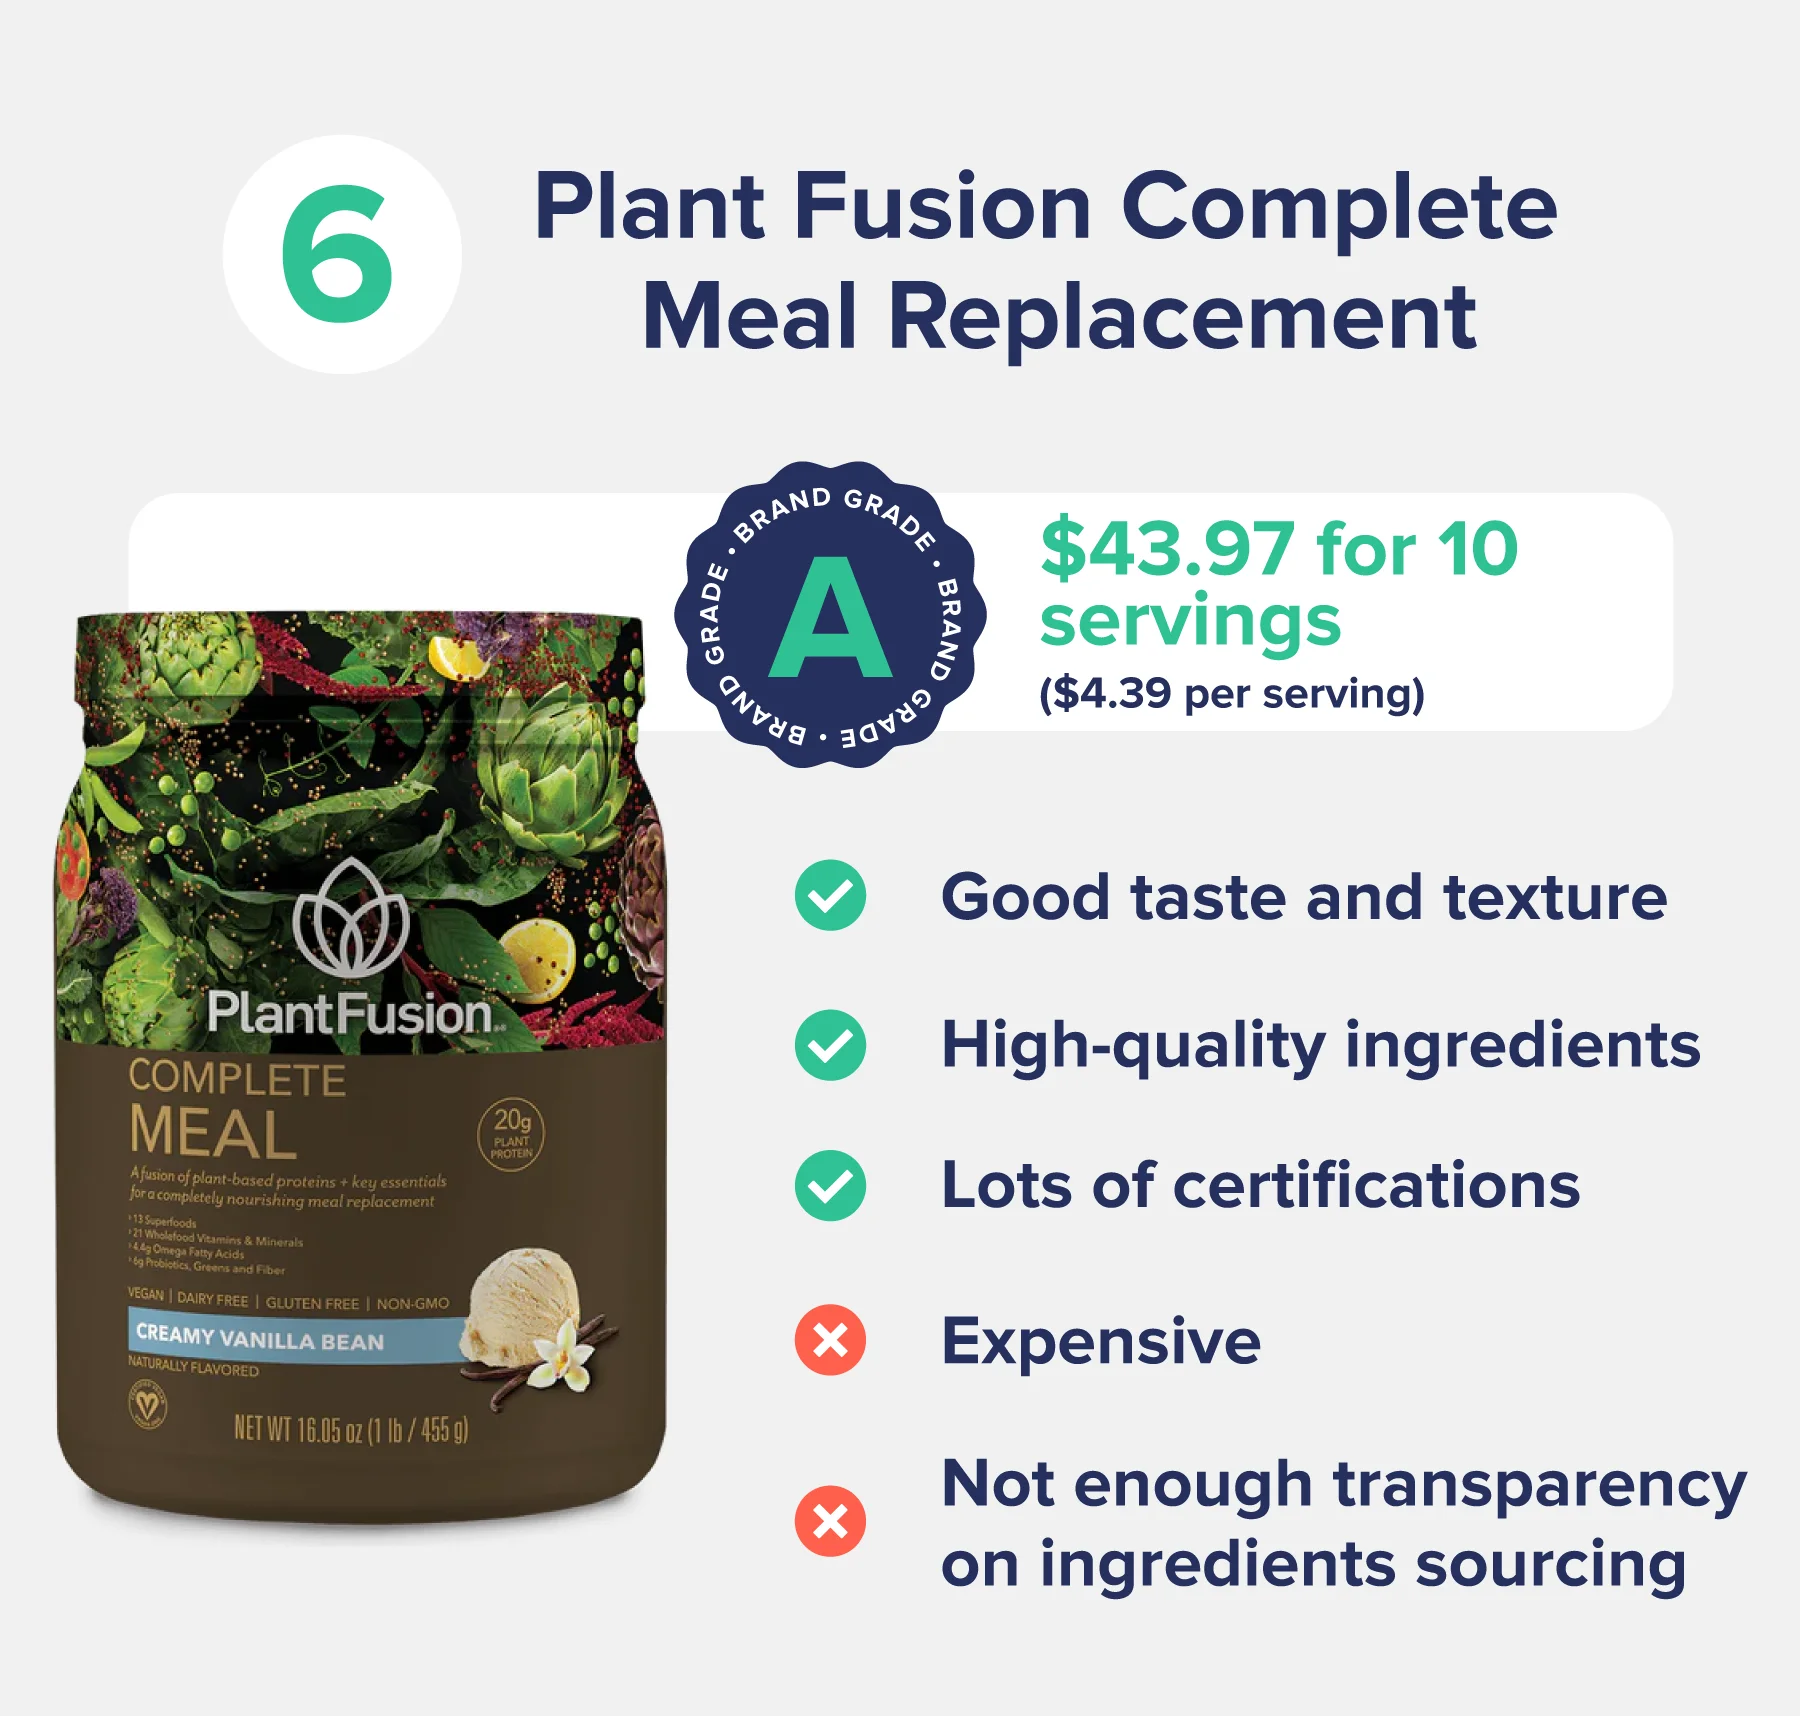 Plant Fusion Complete Meal Replacement with list of pros and cons